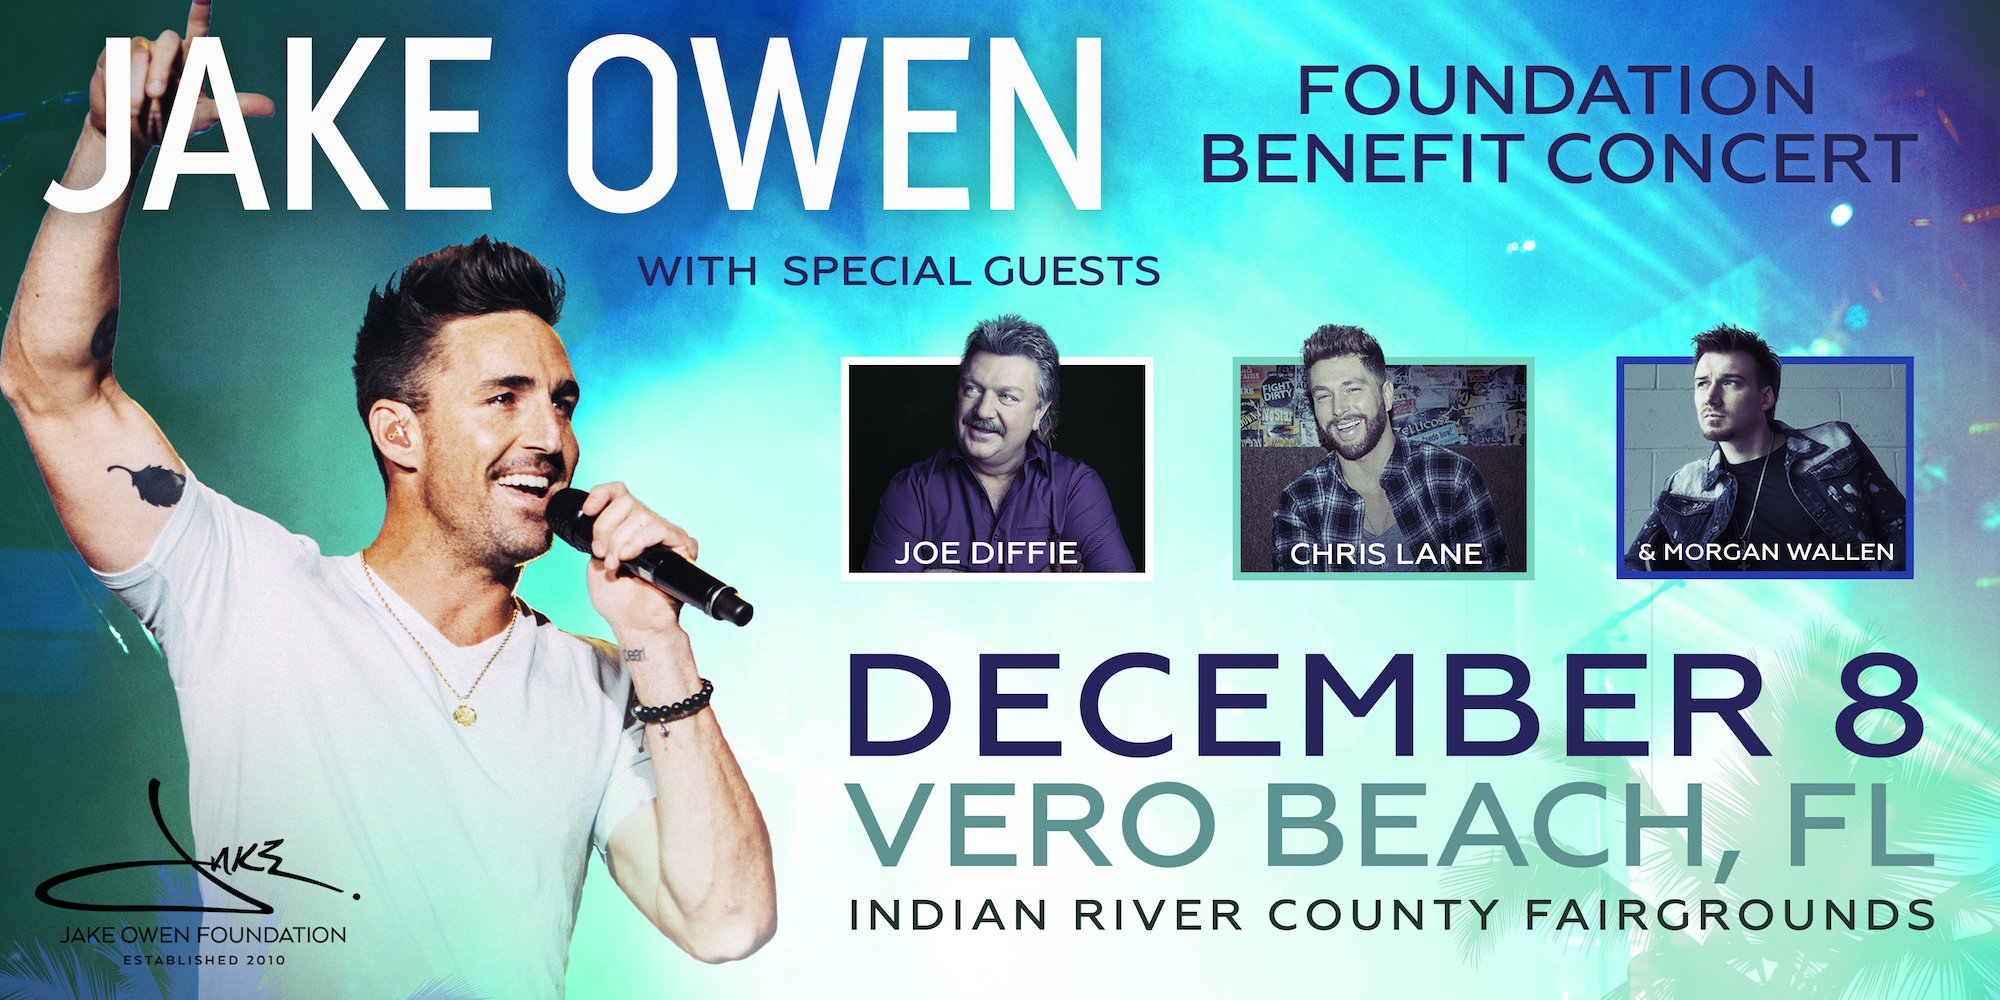 Jake Owen on Twitter back home and playing in Vero Beach is